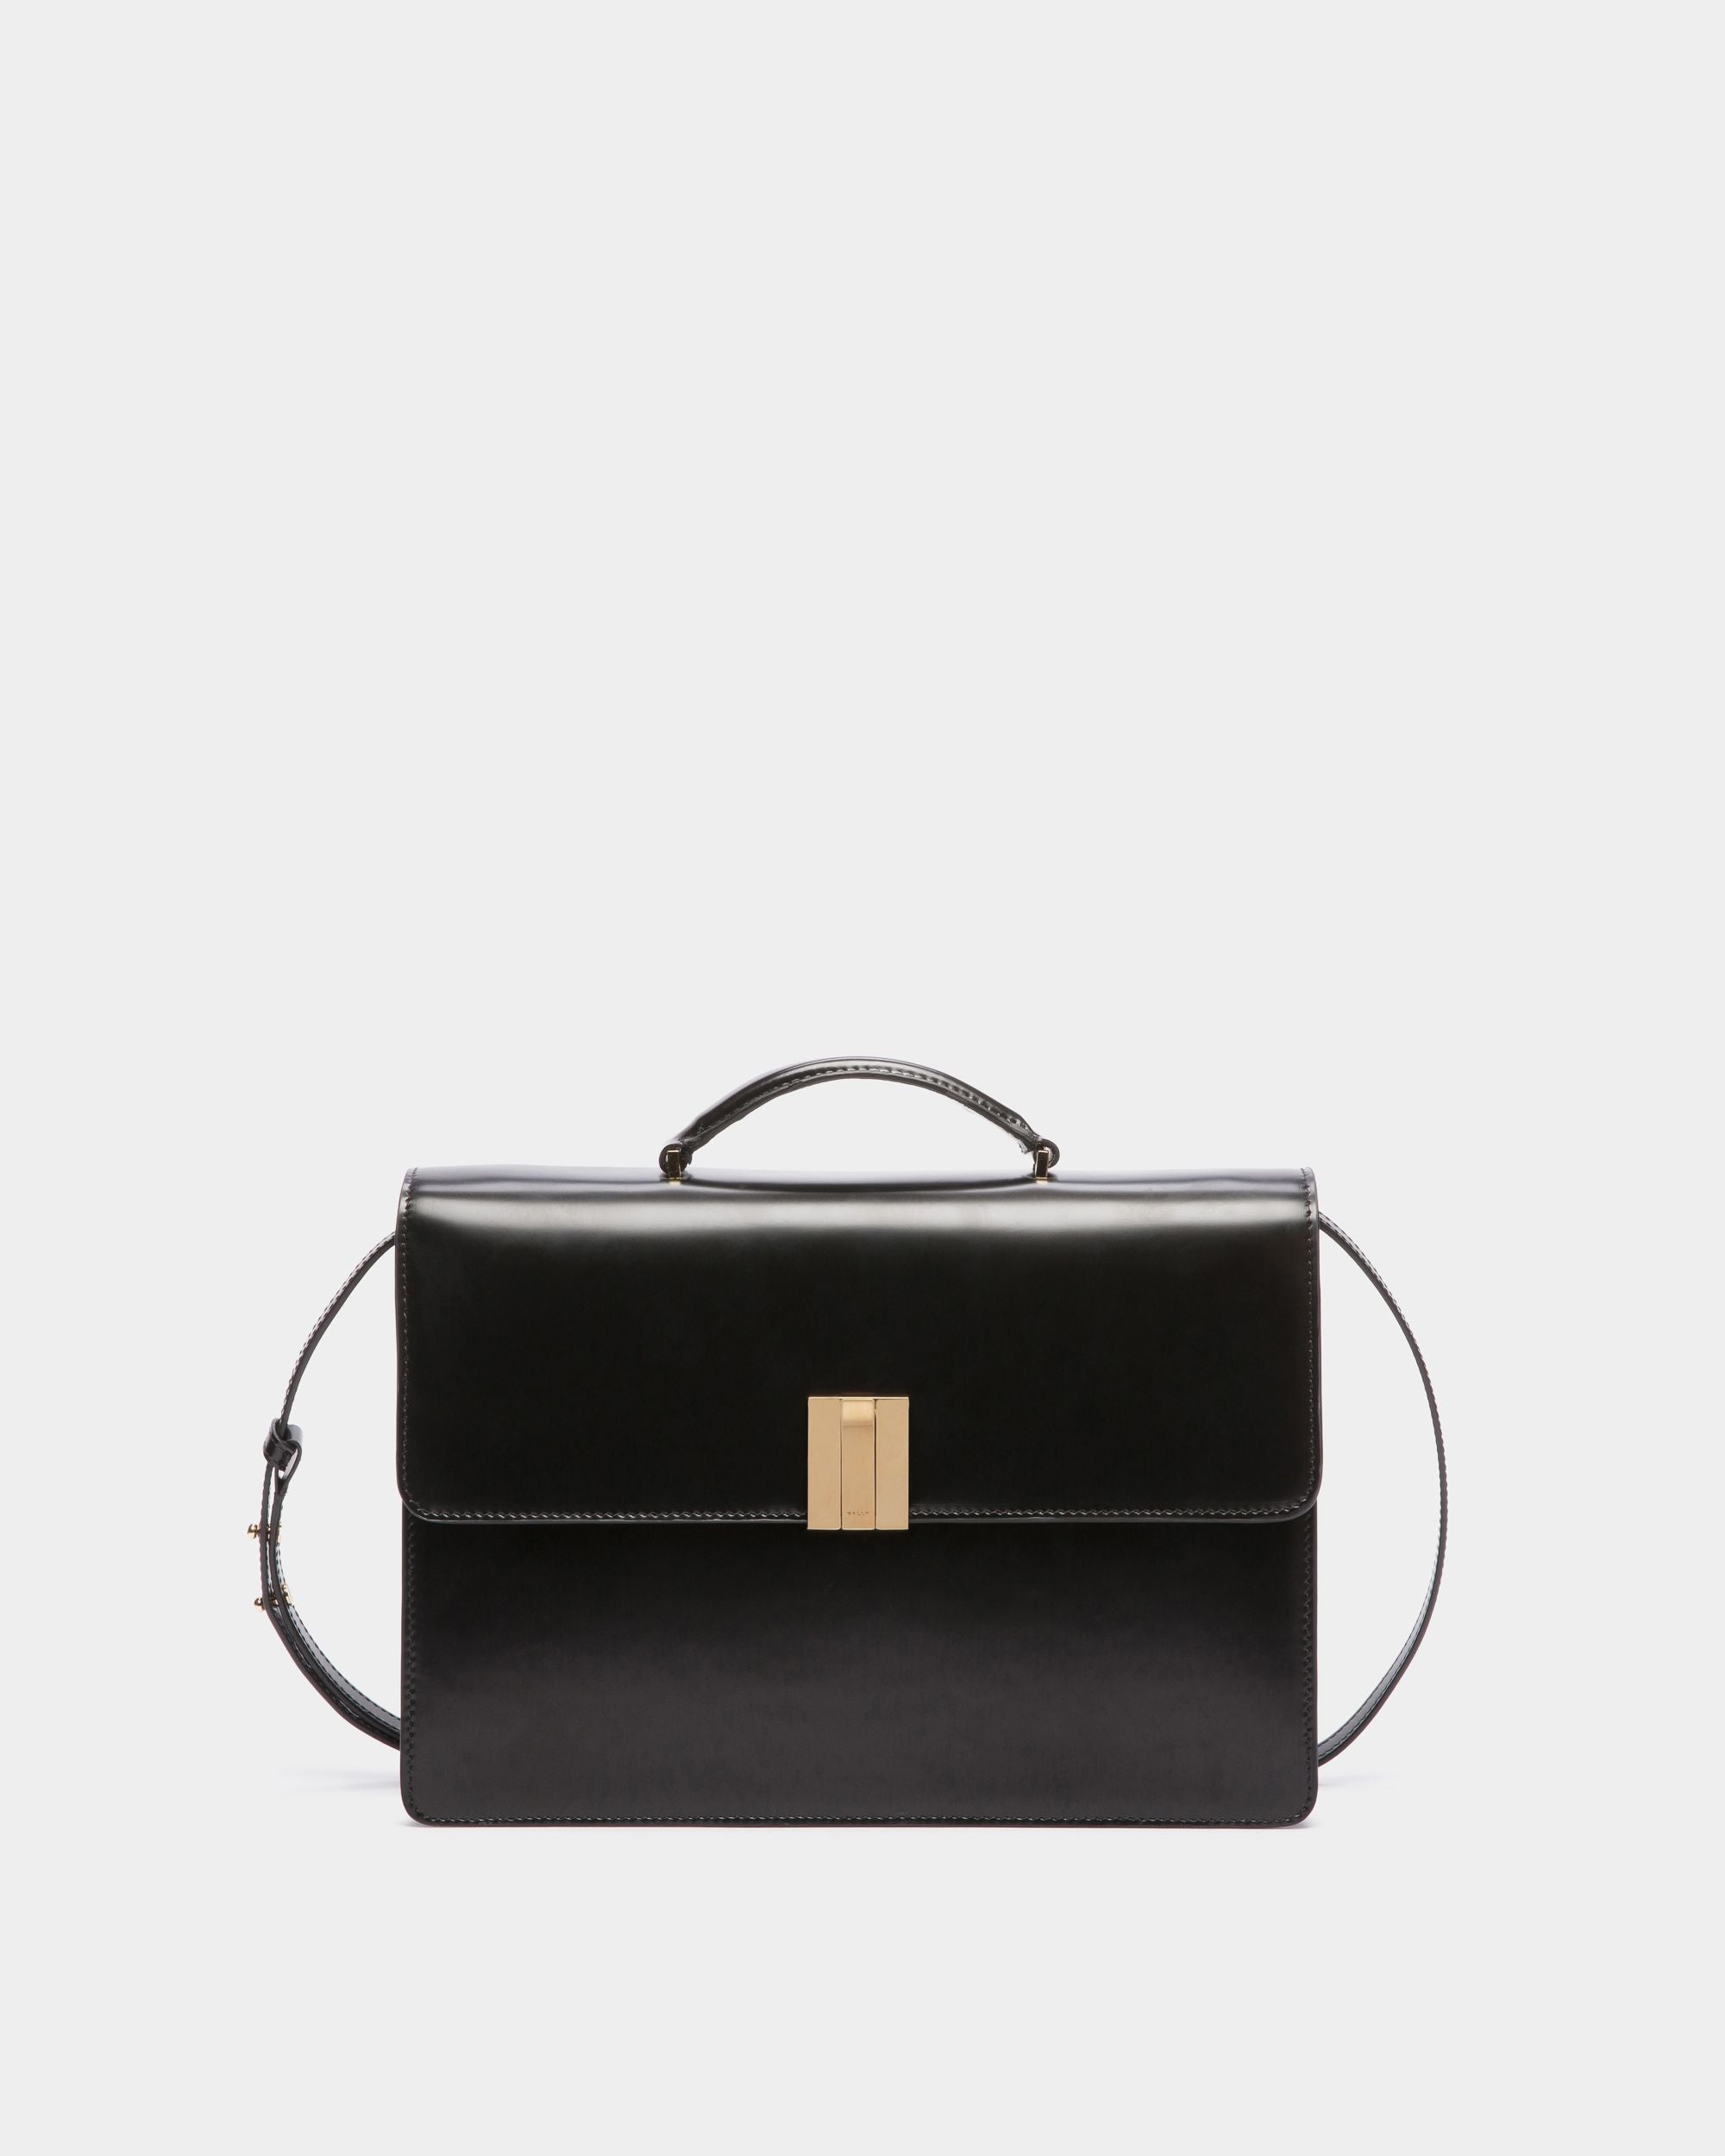 Women's Ollam Top Handle Bag in Black Brushed Leather | Bally | Still Life Front